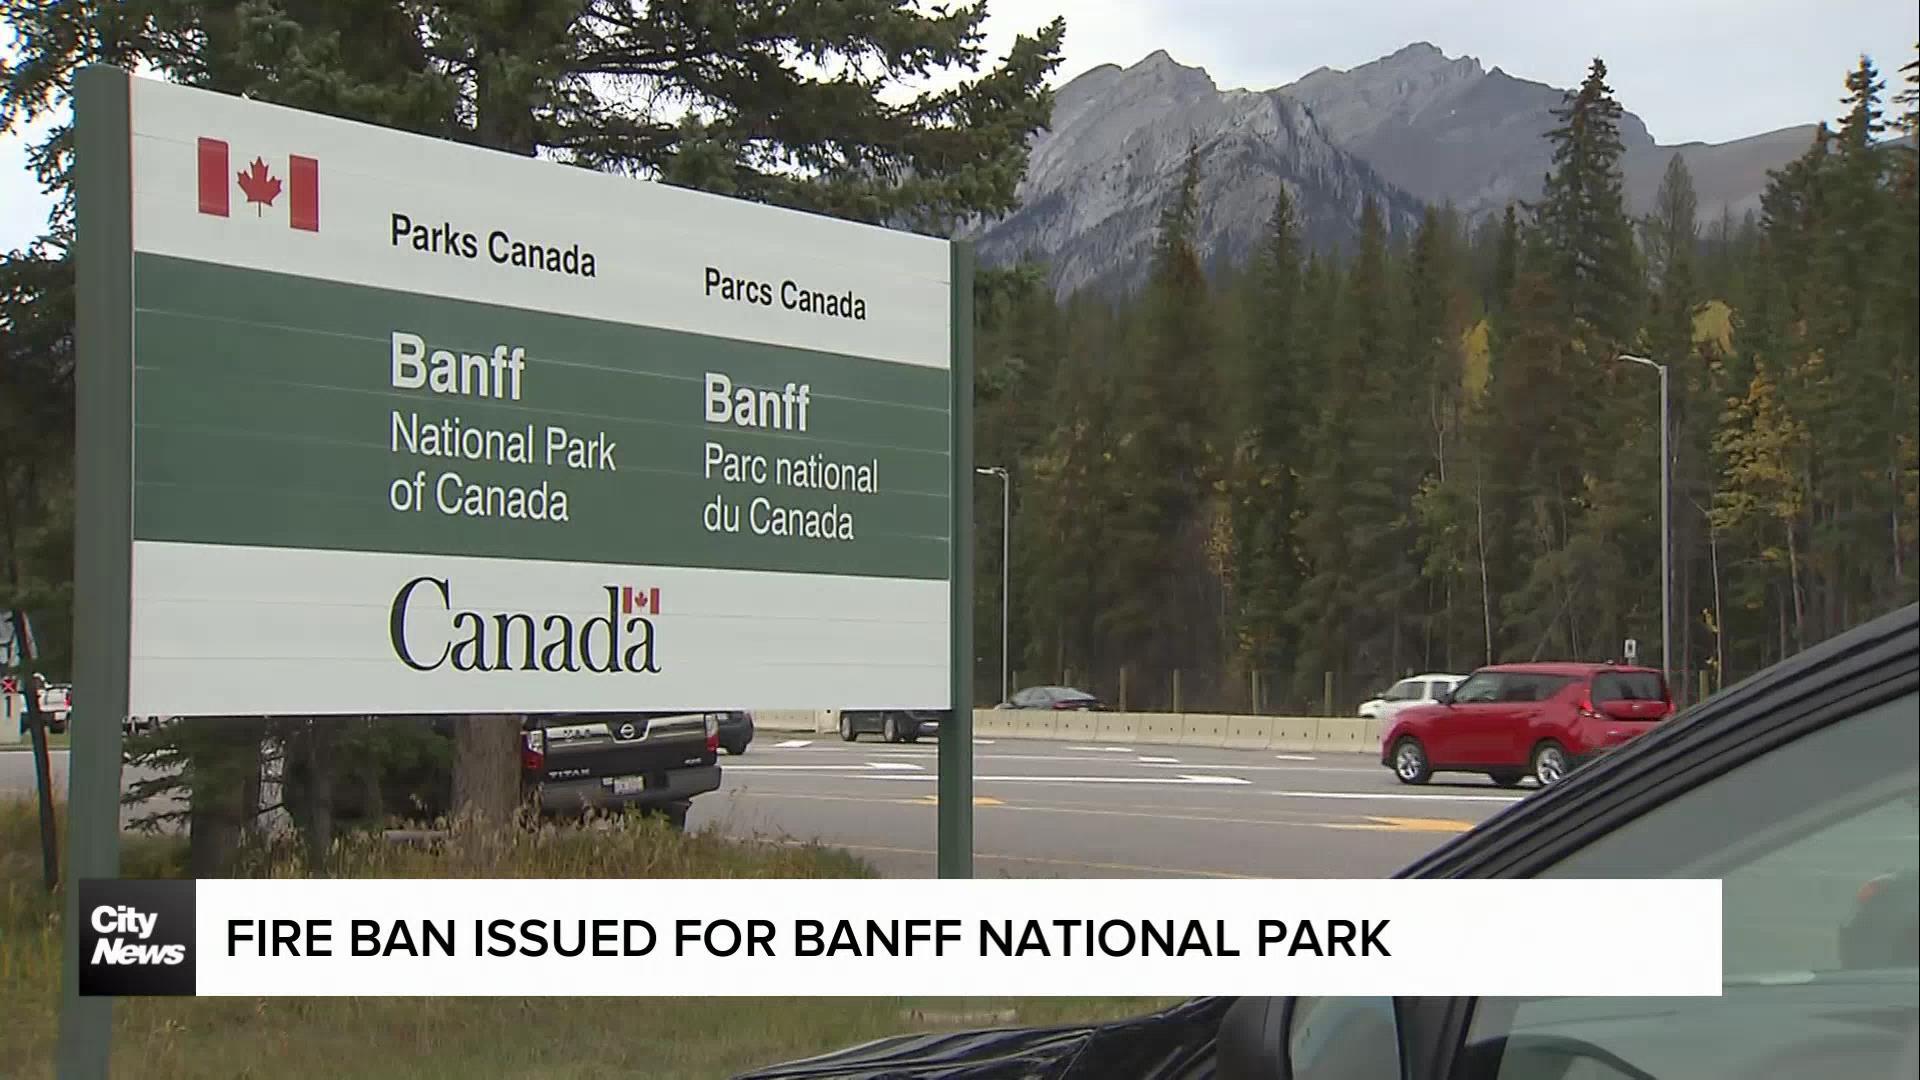 Fire ban issued for Banff National Park